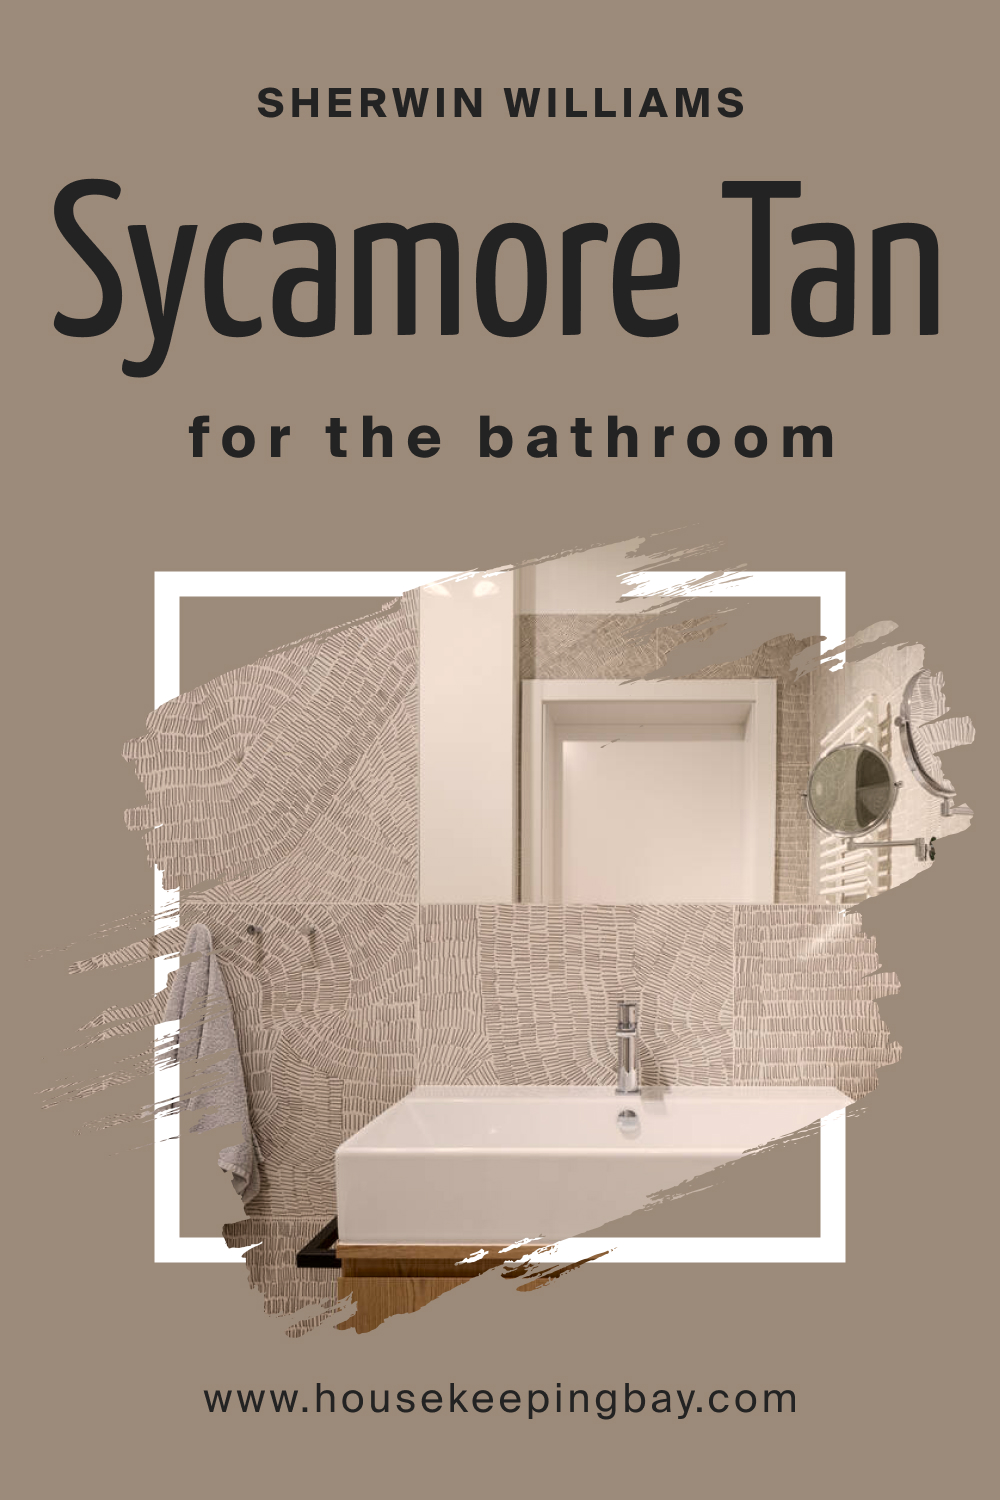 Sherwin Williams. SW 2855 Sycamore Tan For the Bathroom